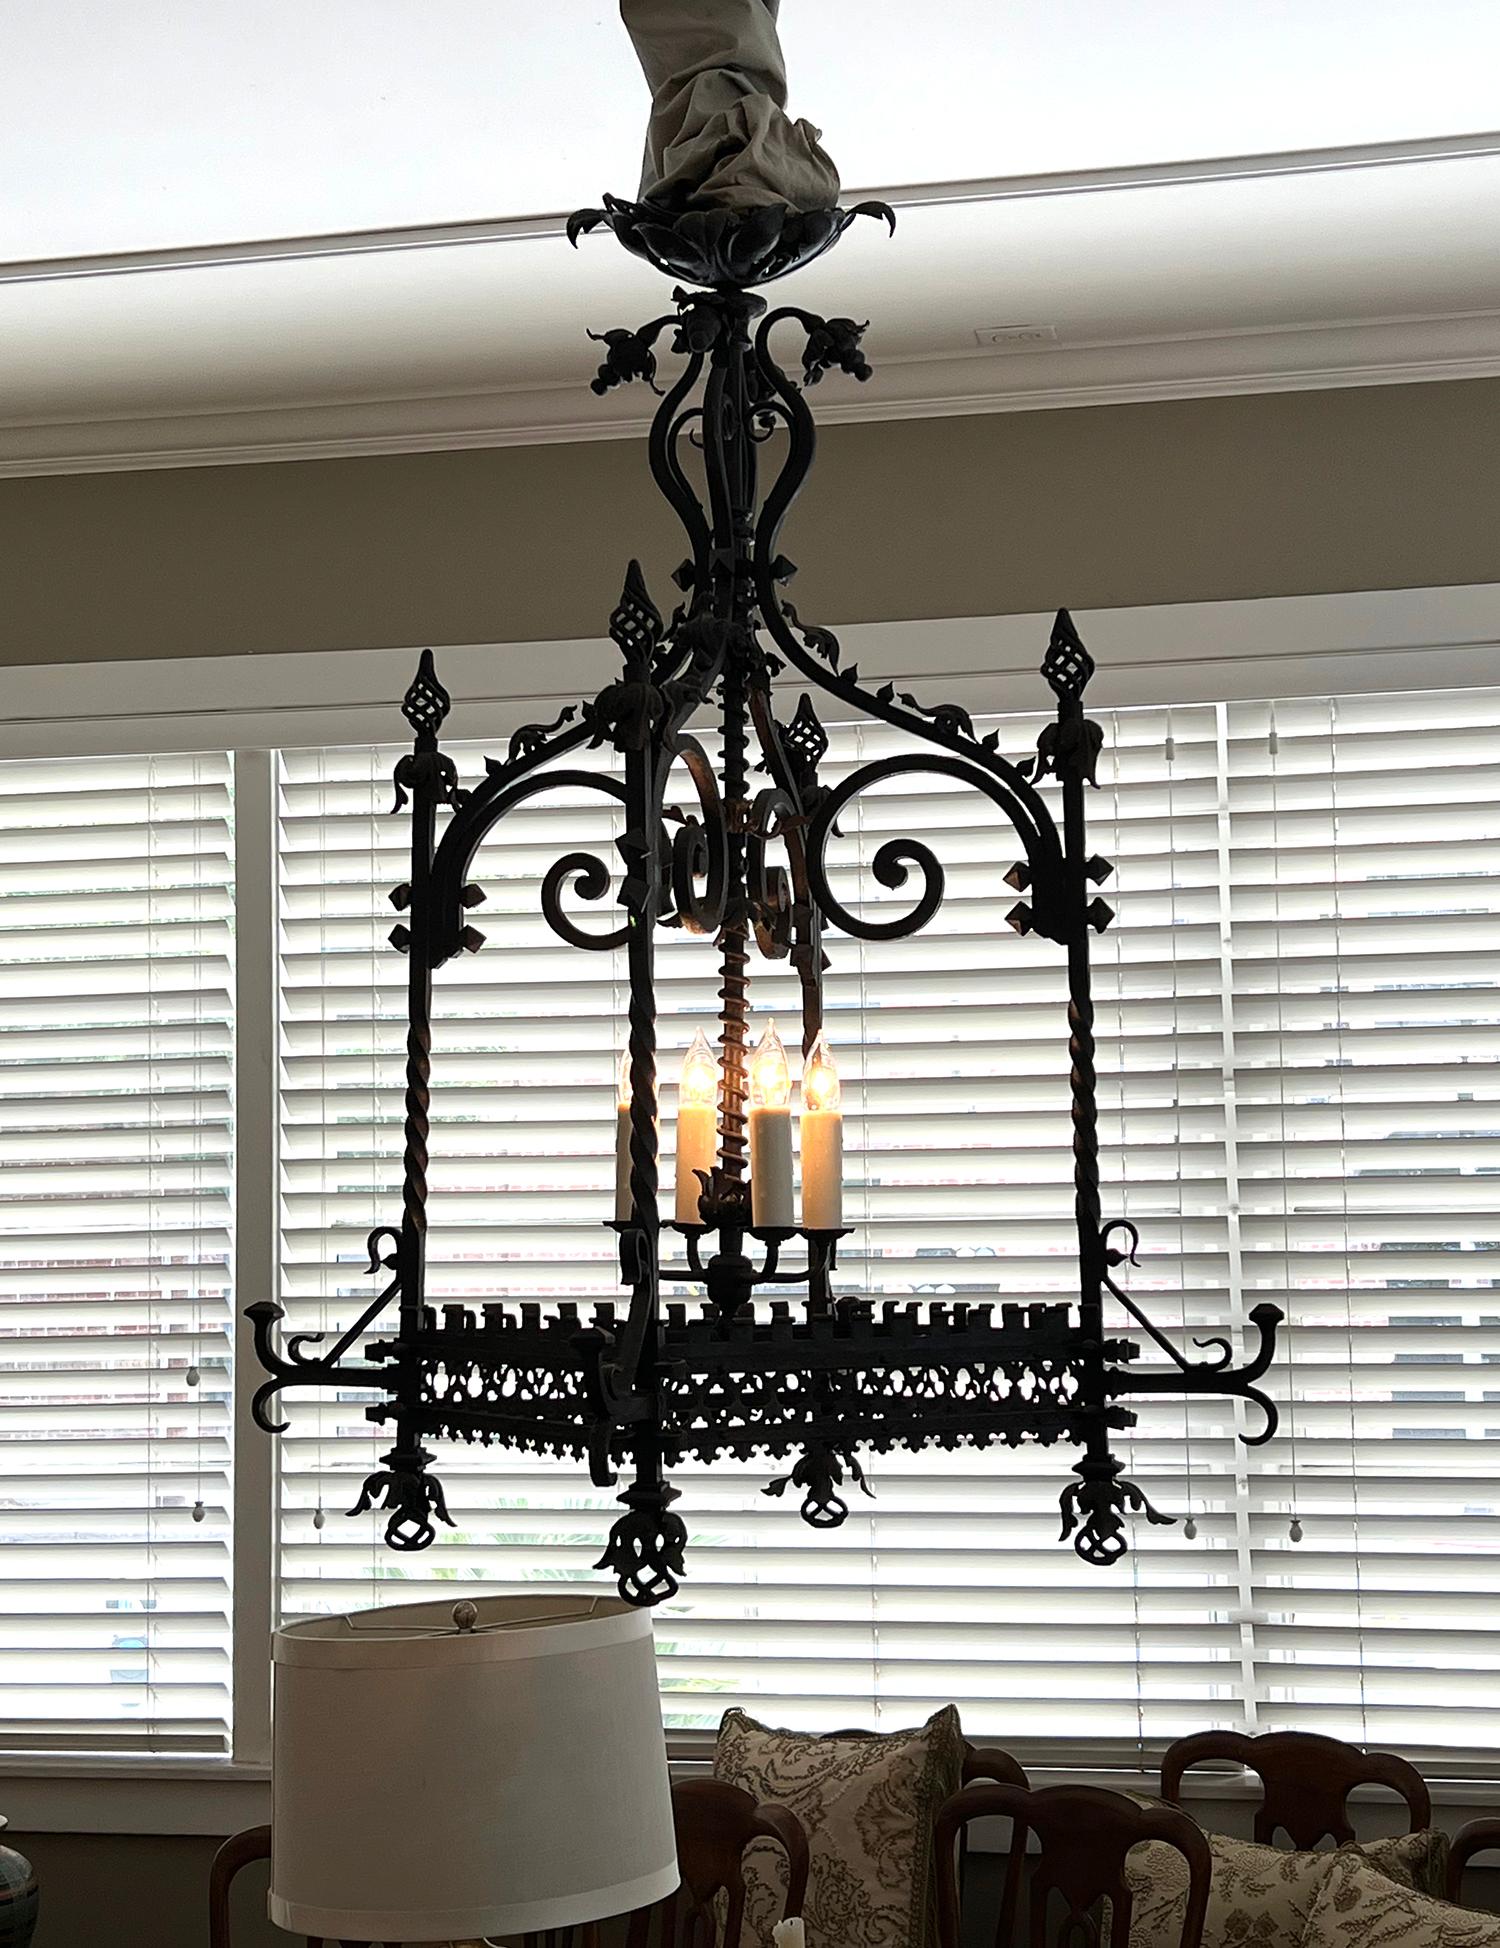 With vasi-form top above a four-sided open frame topped with spiraling finials resting on twisted supports ending in similar spiraling pendants all joined by an openwork trefoil perimeter border; all surrounding a later 4-light cluster.